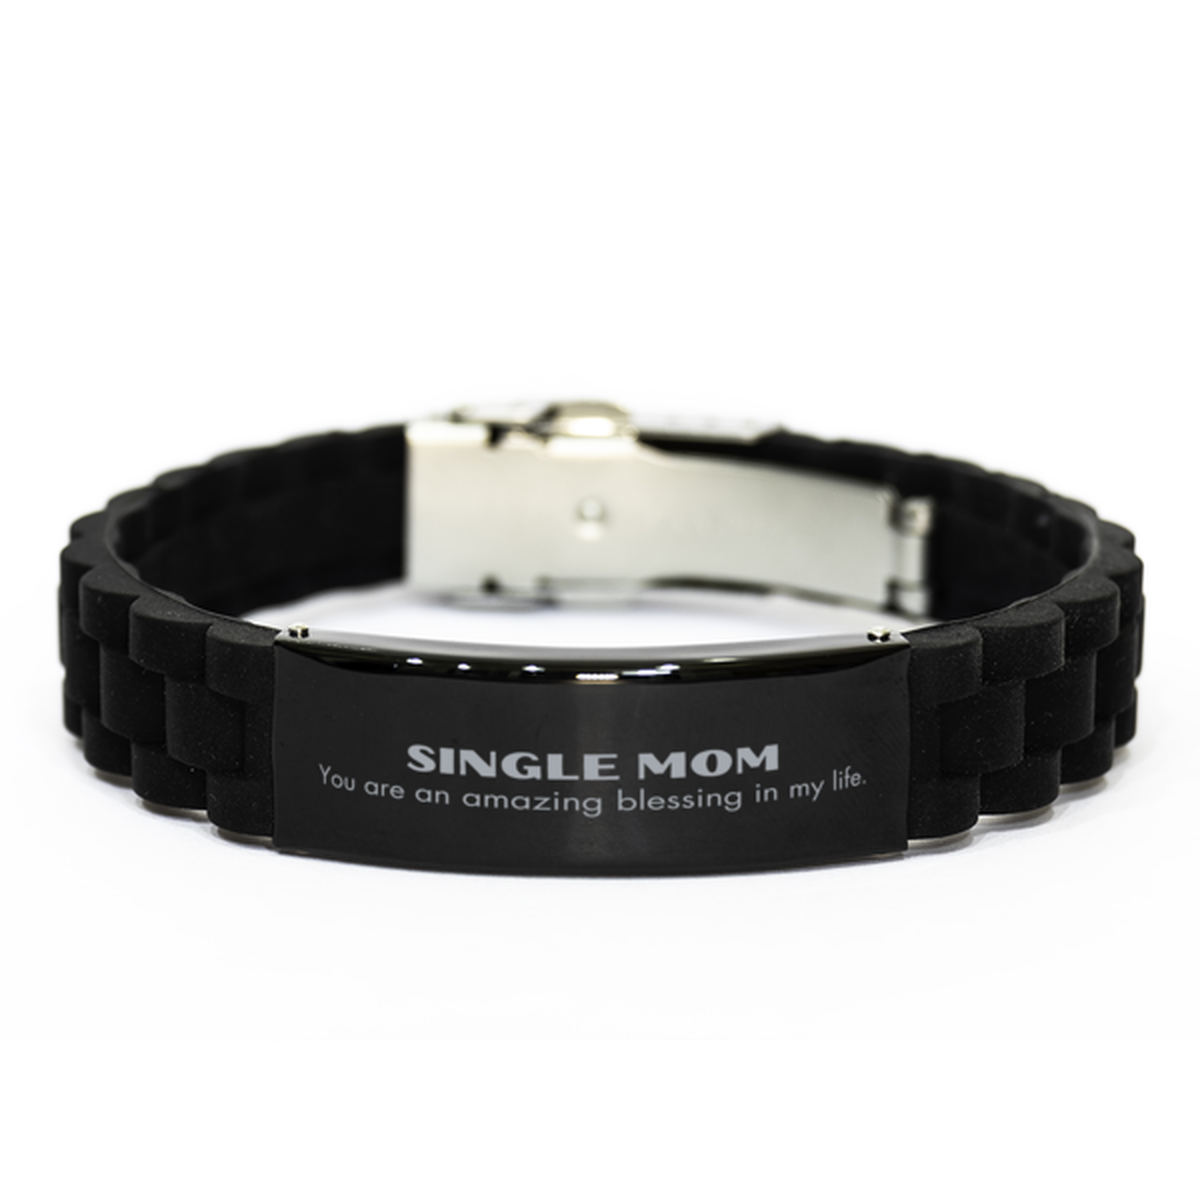 Single Mom Black Glidelock Clasp Bracelet, You are an amazing blessing in my life, Thank You Gifts For Single Mom, Inspirational Birthday Christmas Unique Gifts For Single Mom